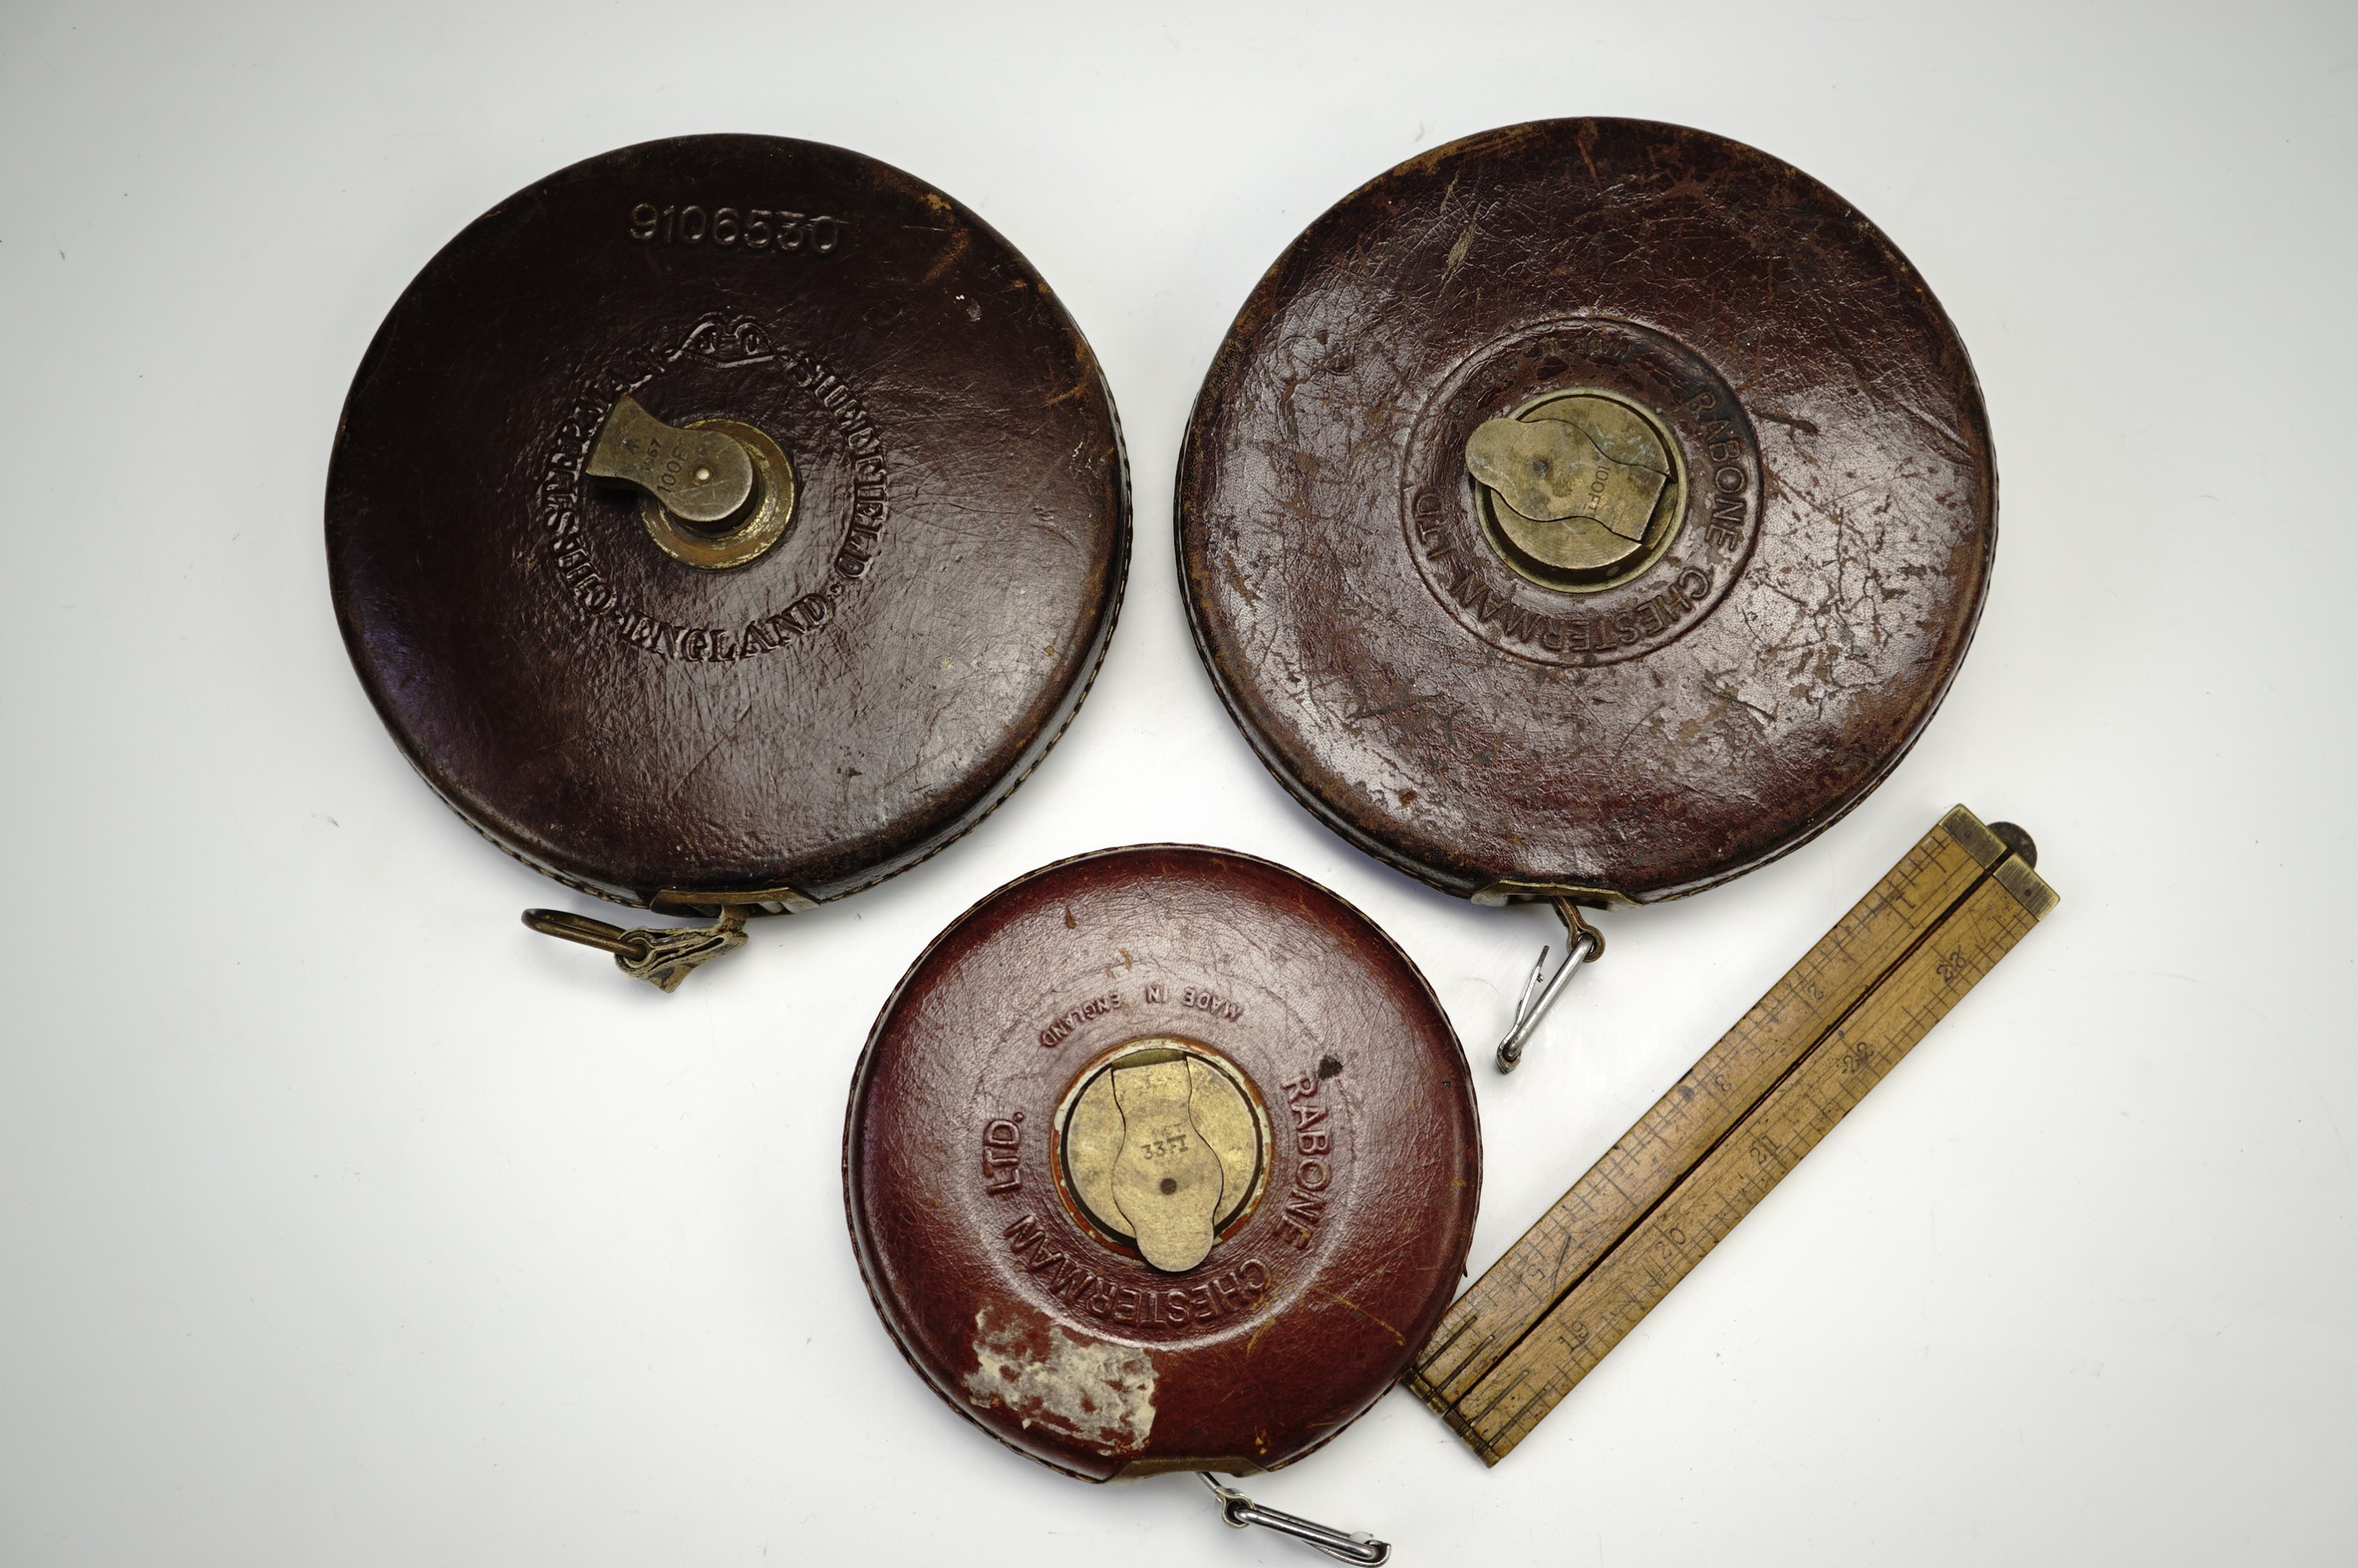 Three architect's / surveyor's tape Rabone measures, imperial markings, one with a repaired end